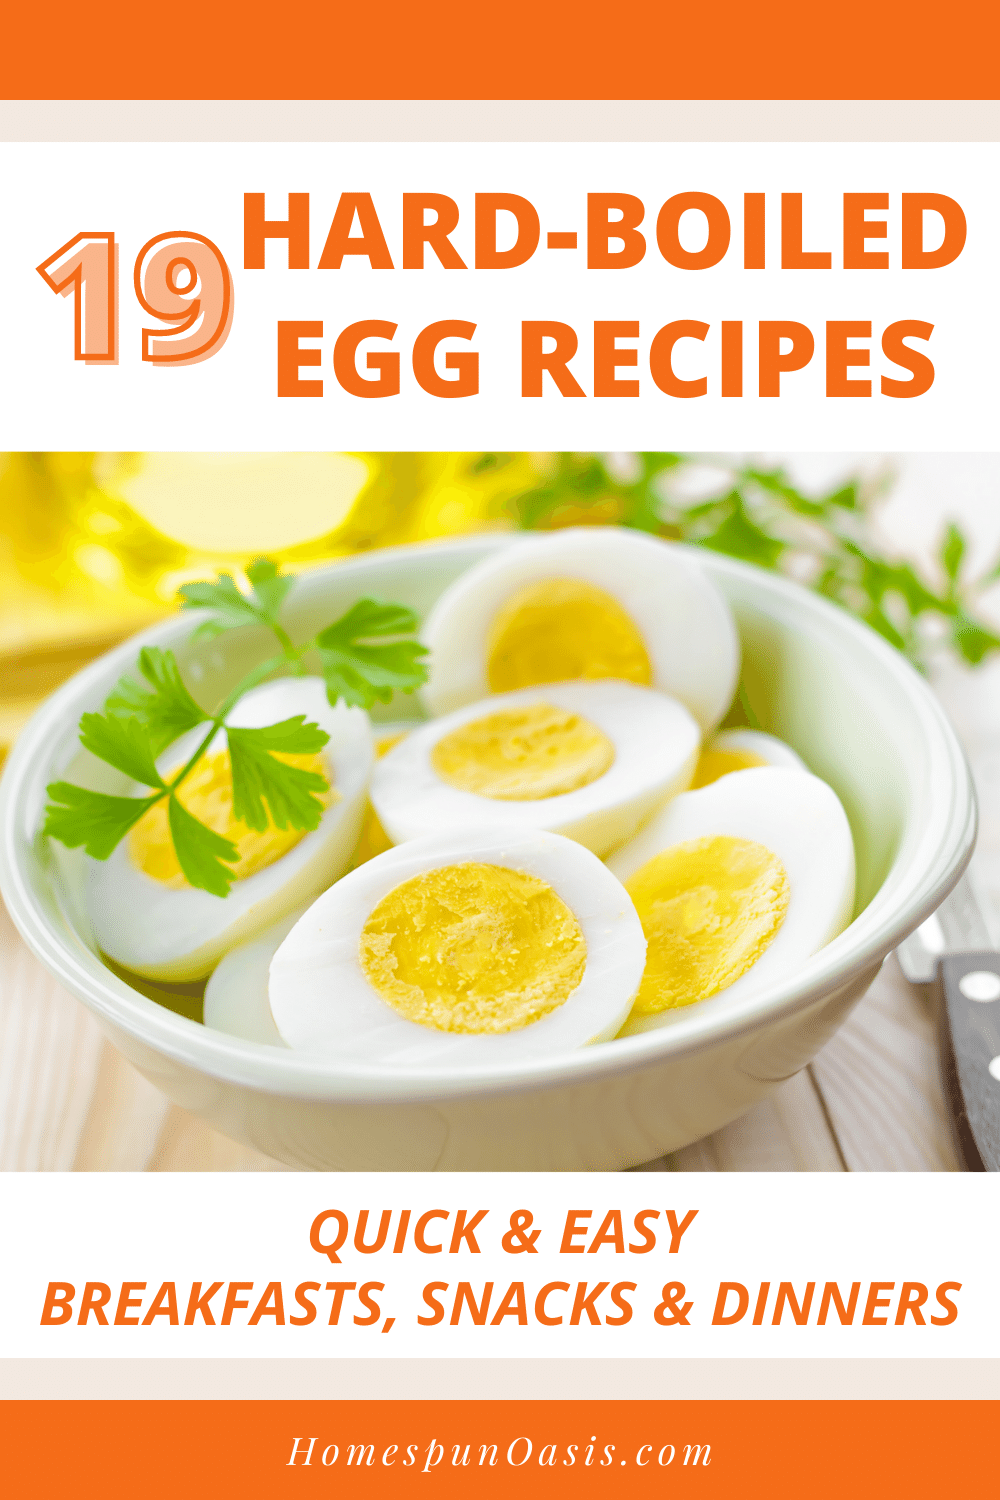 19 Quick & Easy Hard-Boiled Egg Recipes